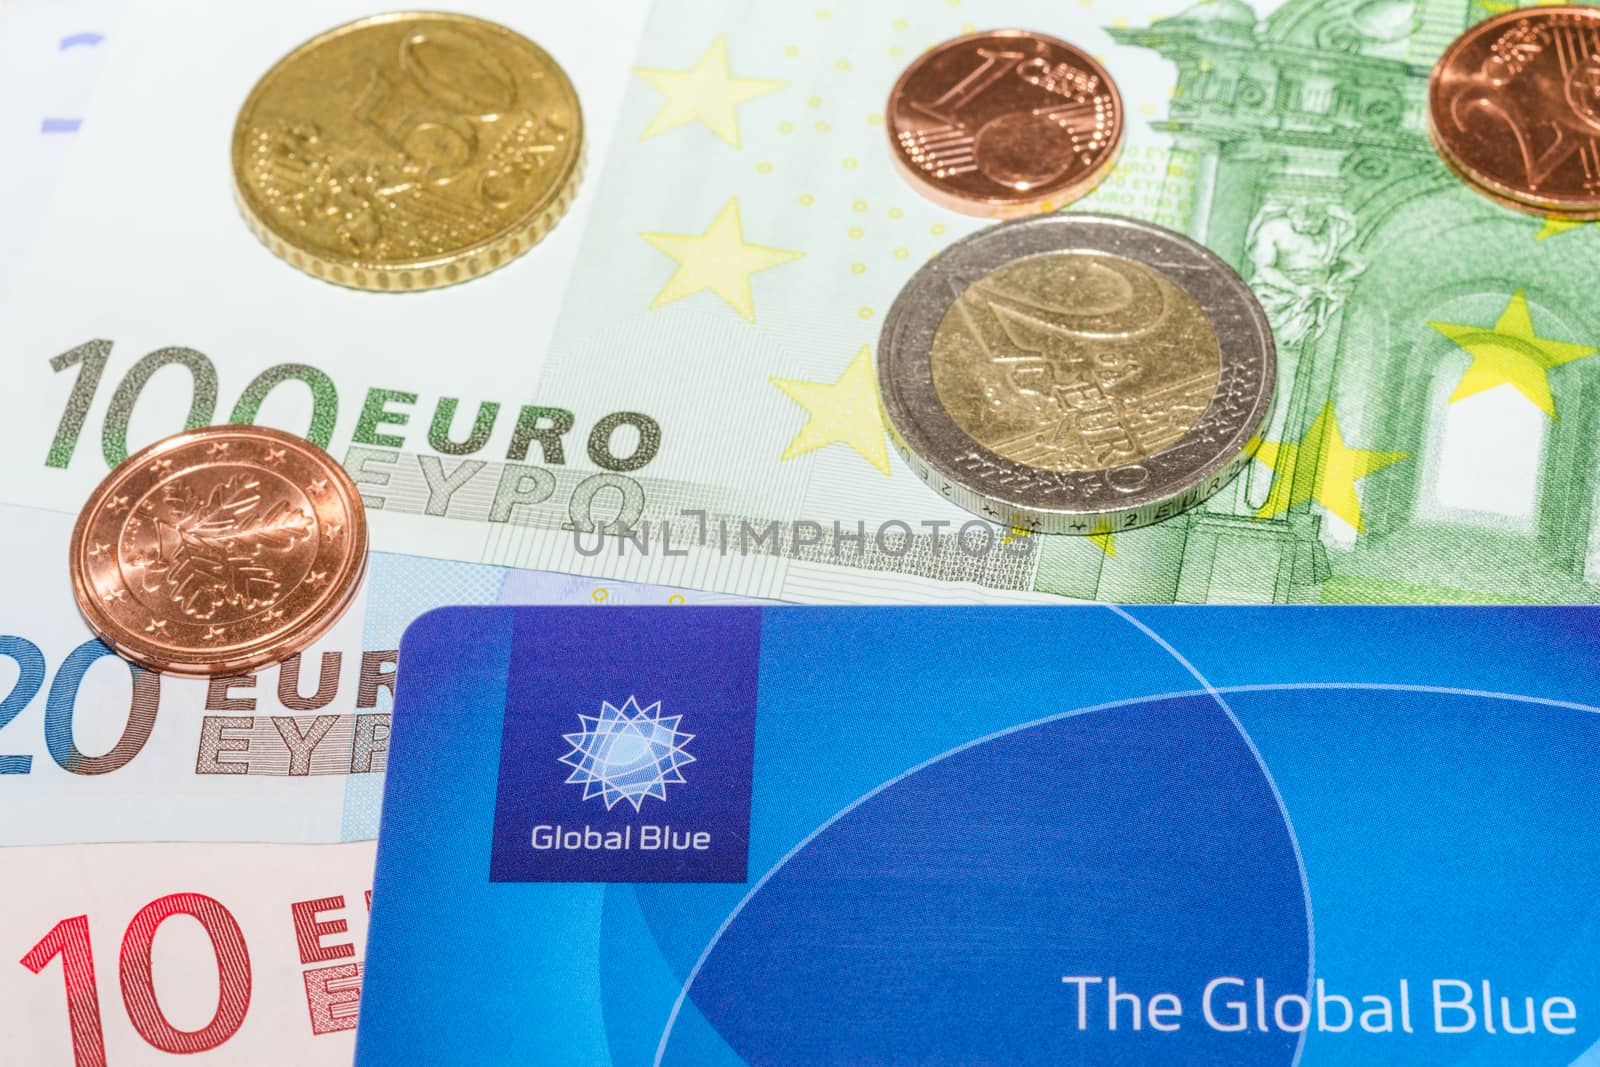 MUNICH, GERMANY - FEBRUARY 23, 2014: European Euro bank notes Cent coins and Global Blue card